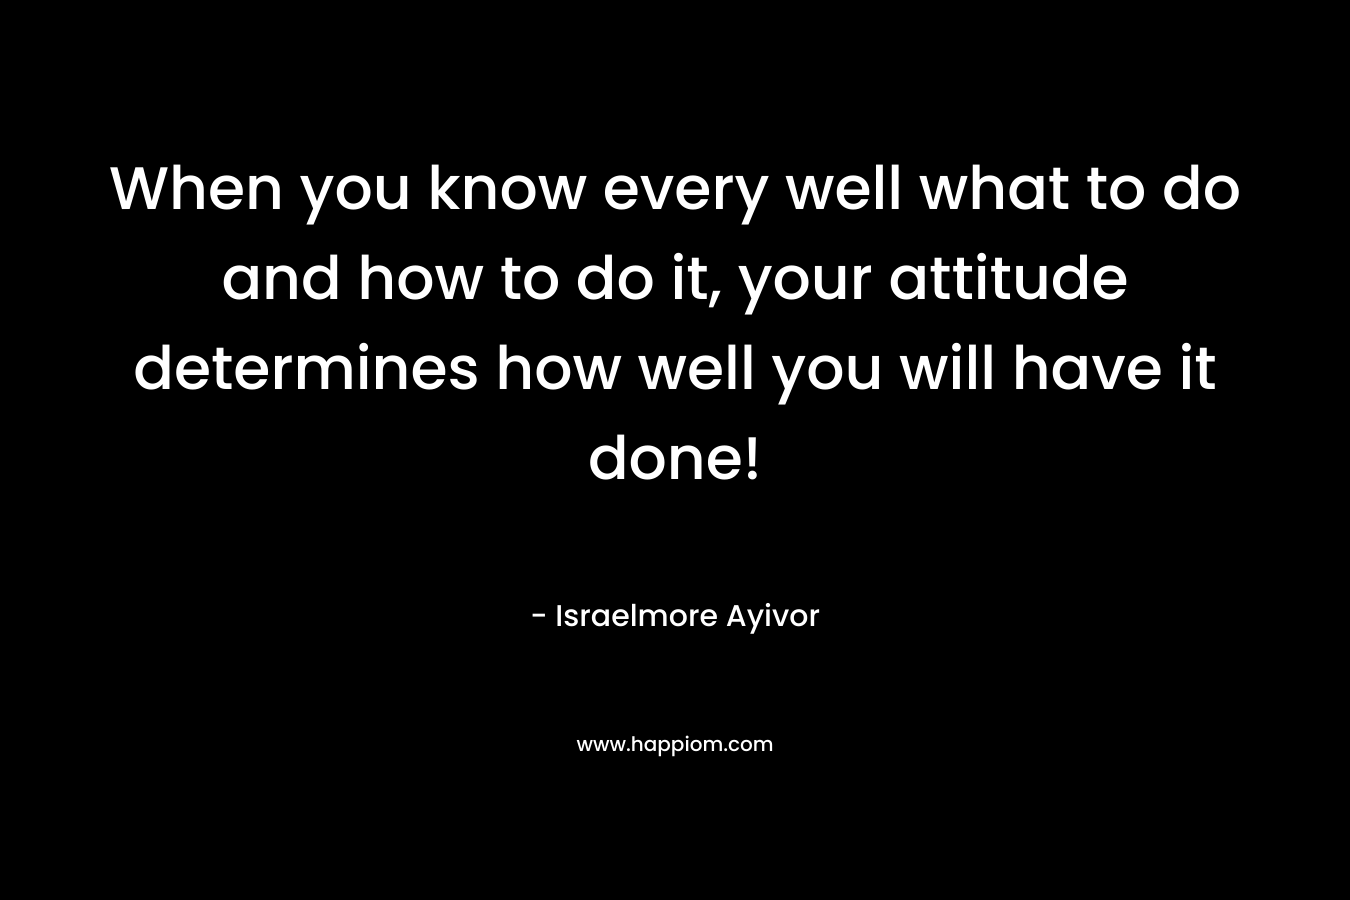 When you know every well what to do and how to do it, your attitude determines how well you will have it done!